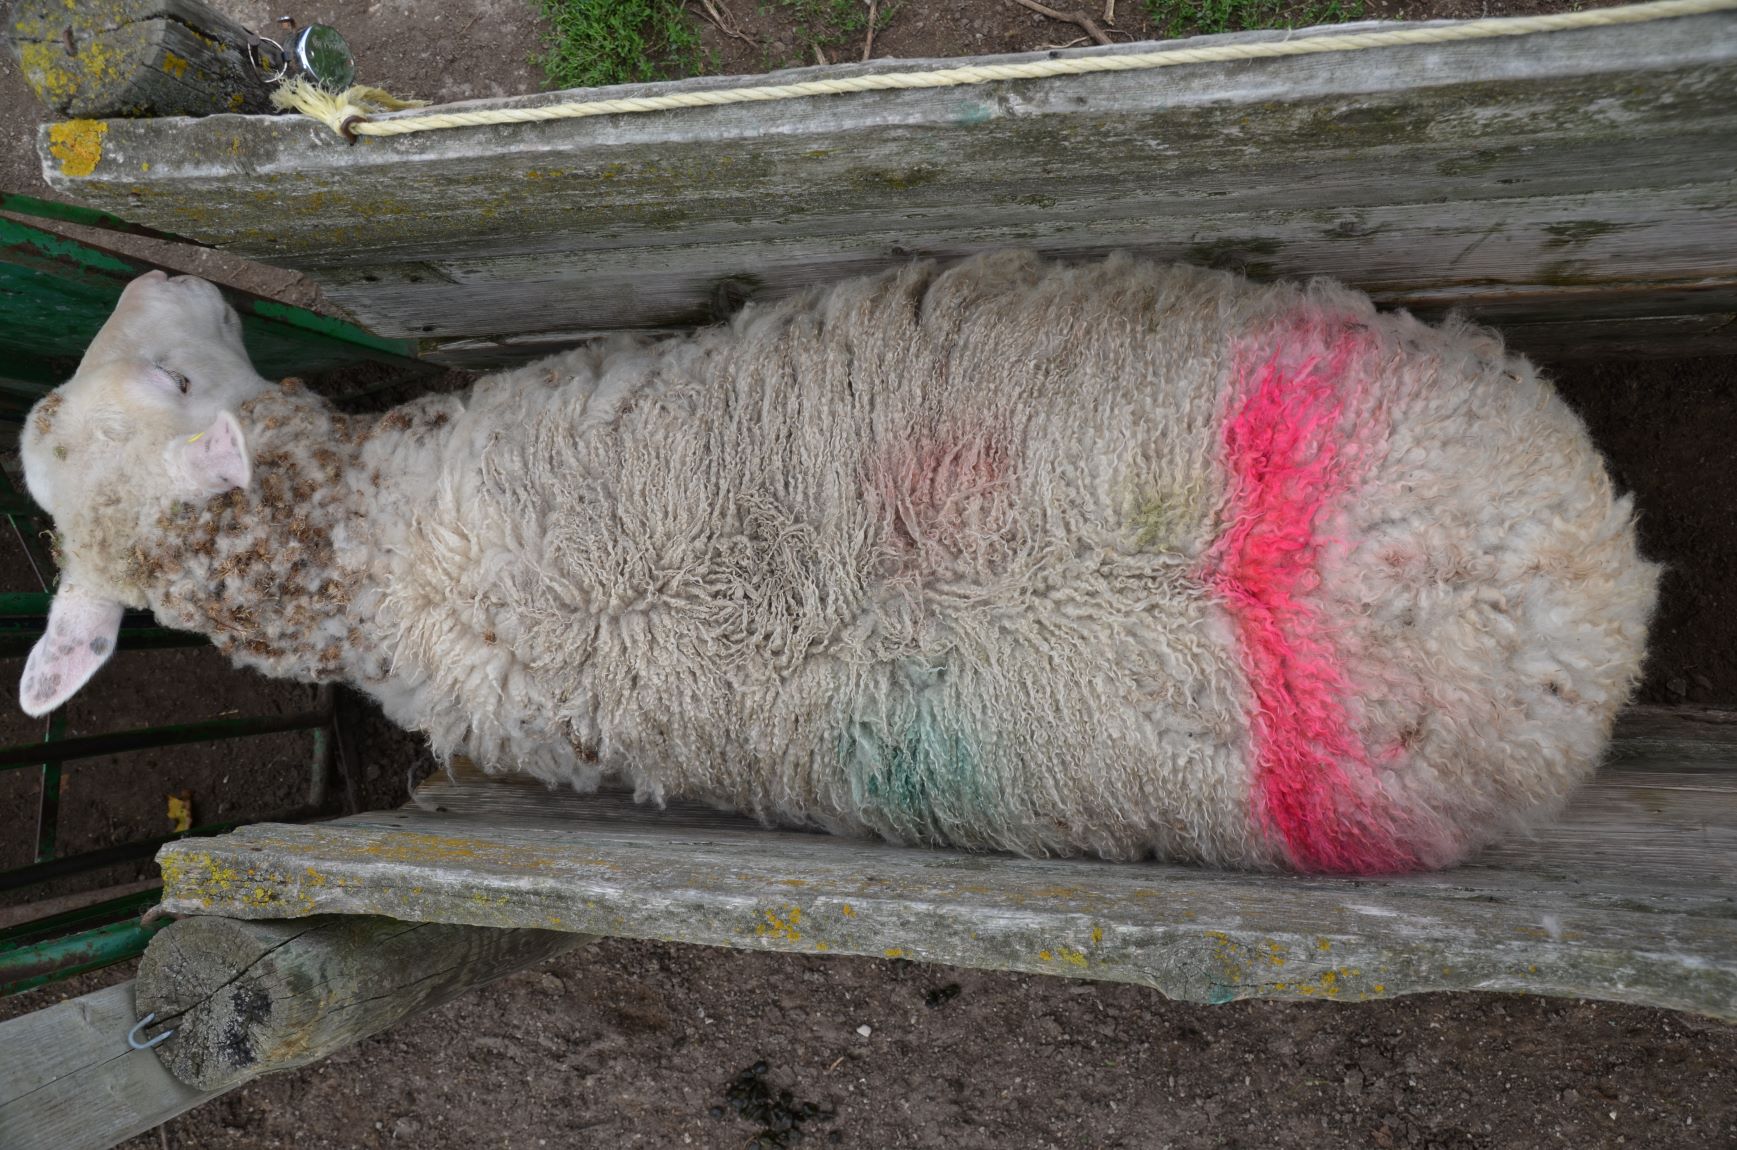 Overhead view of a slightly fat ewe with a body condition score of 4.